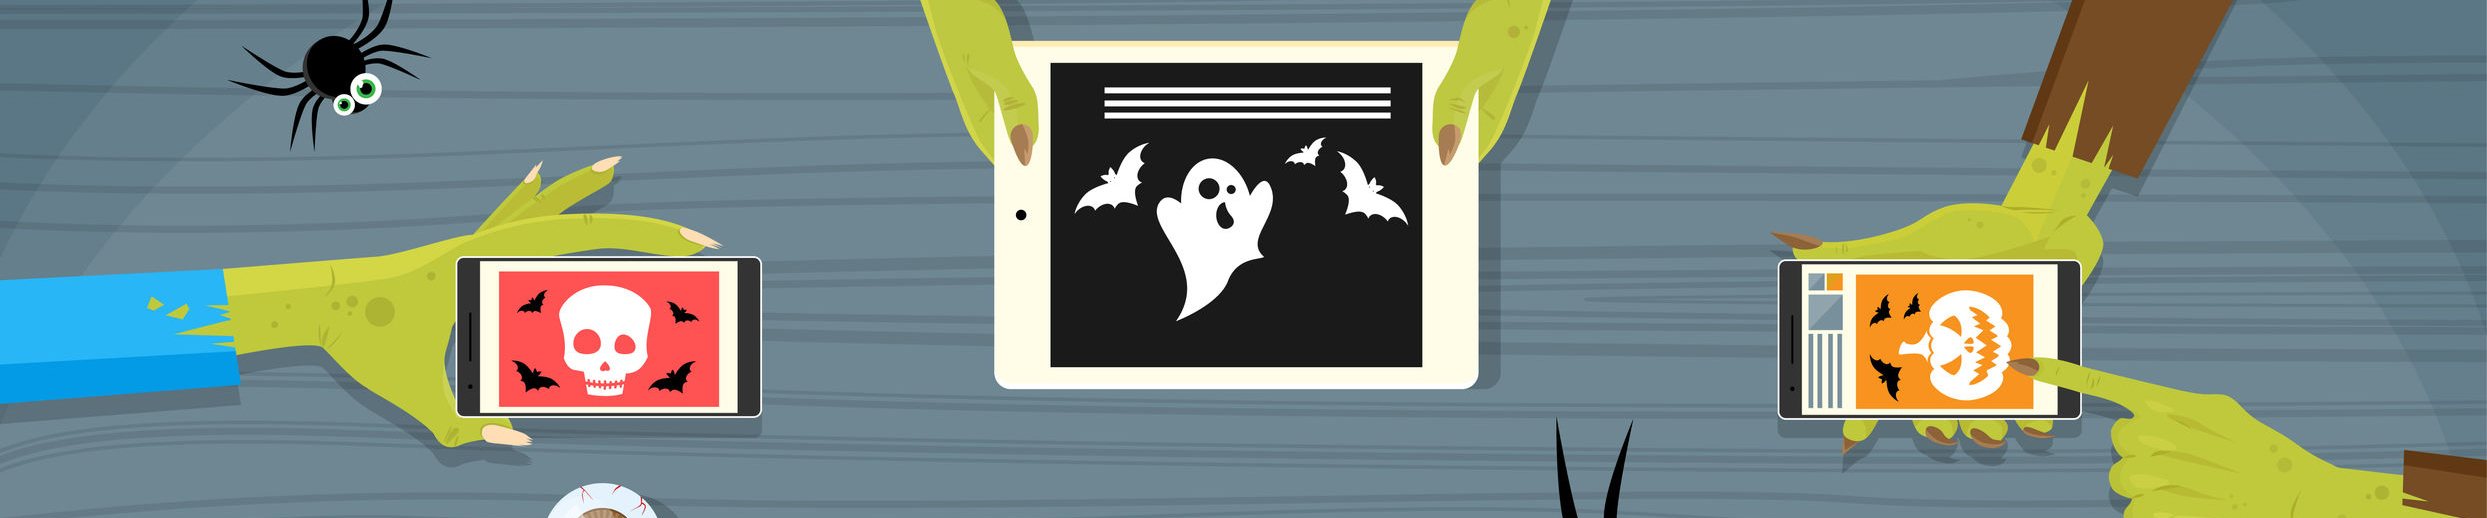 Halloween Mobile Devices